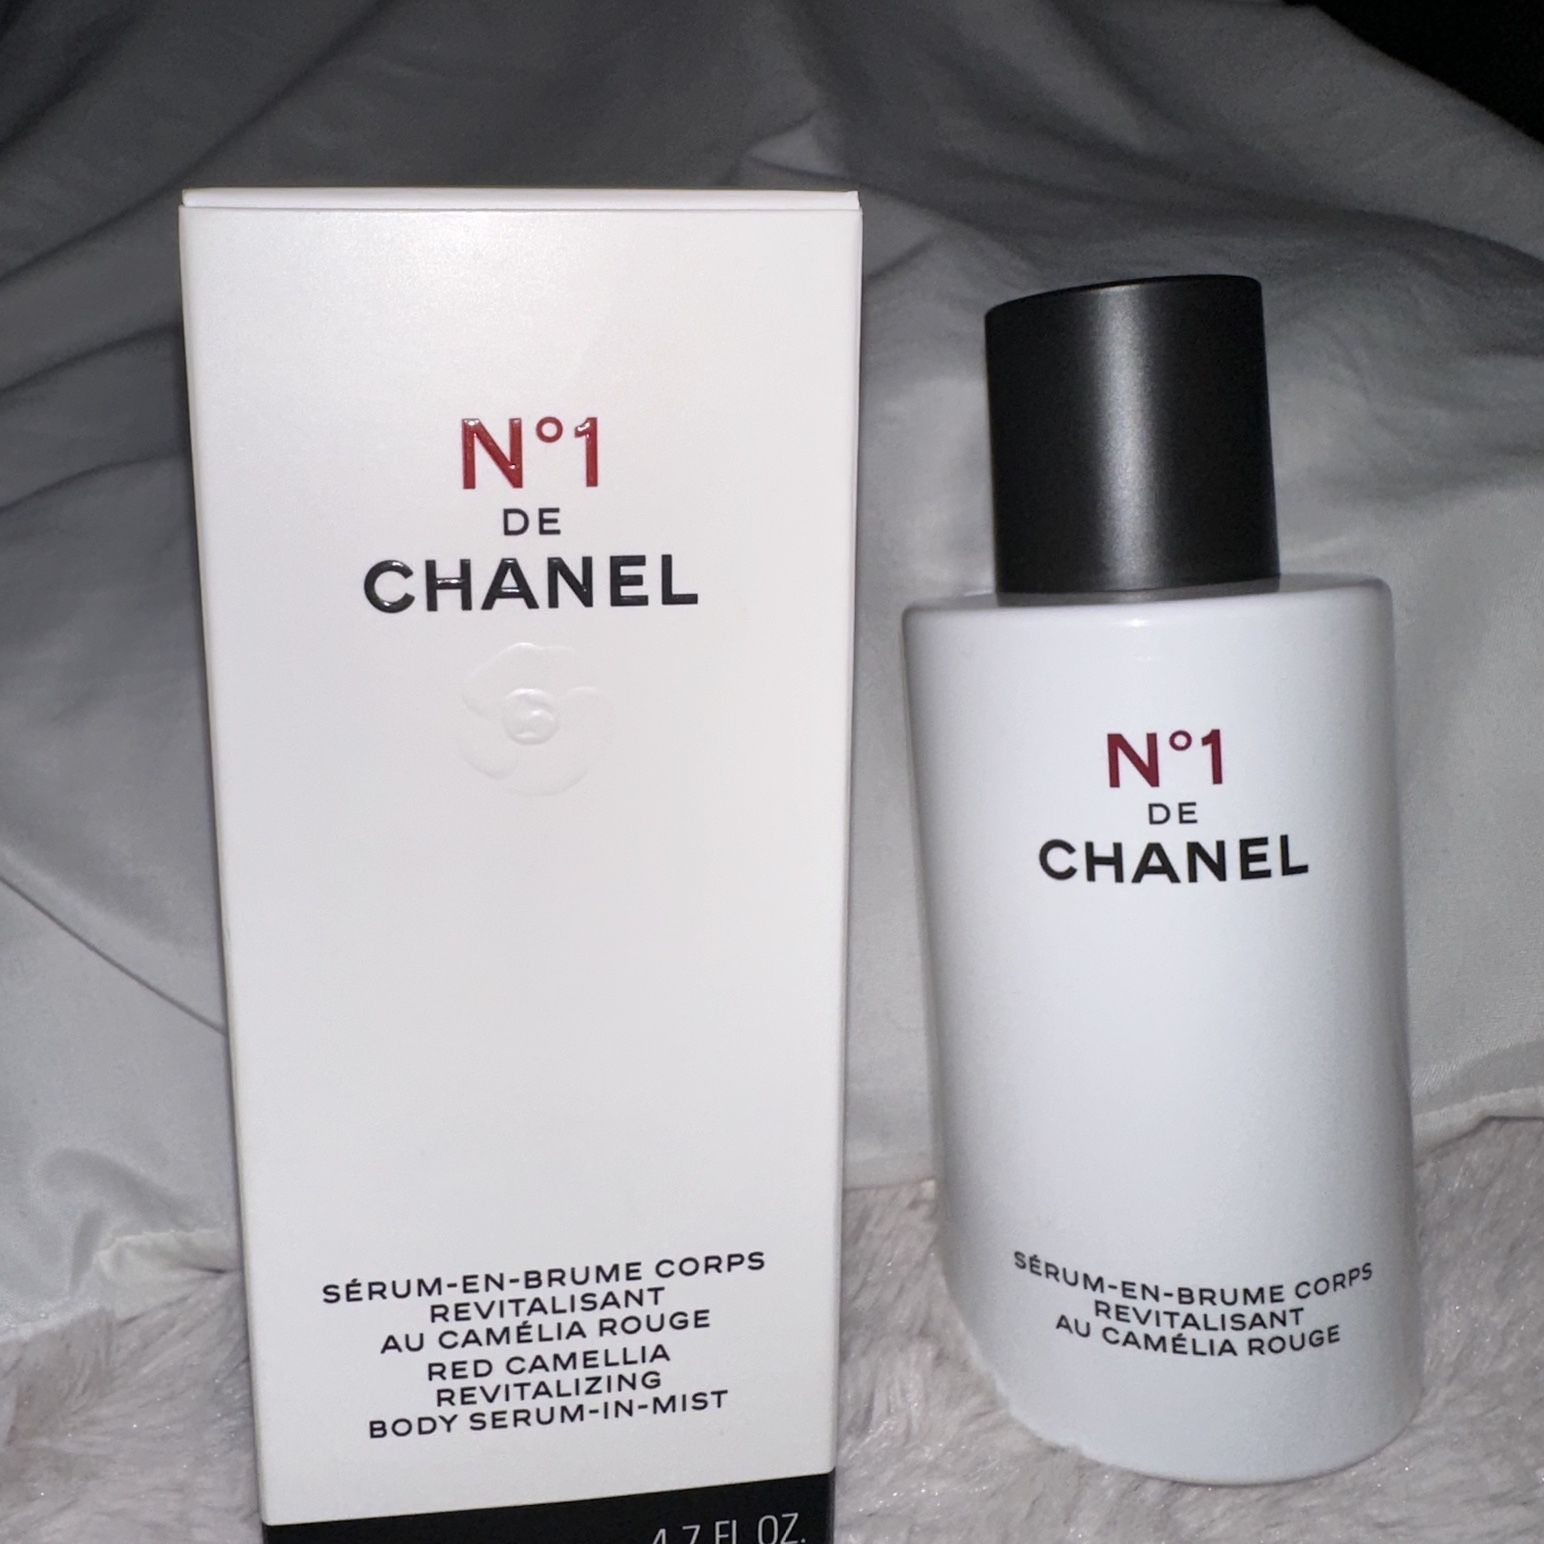 chanel number five lotion